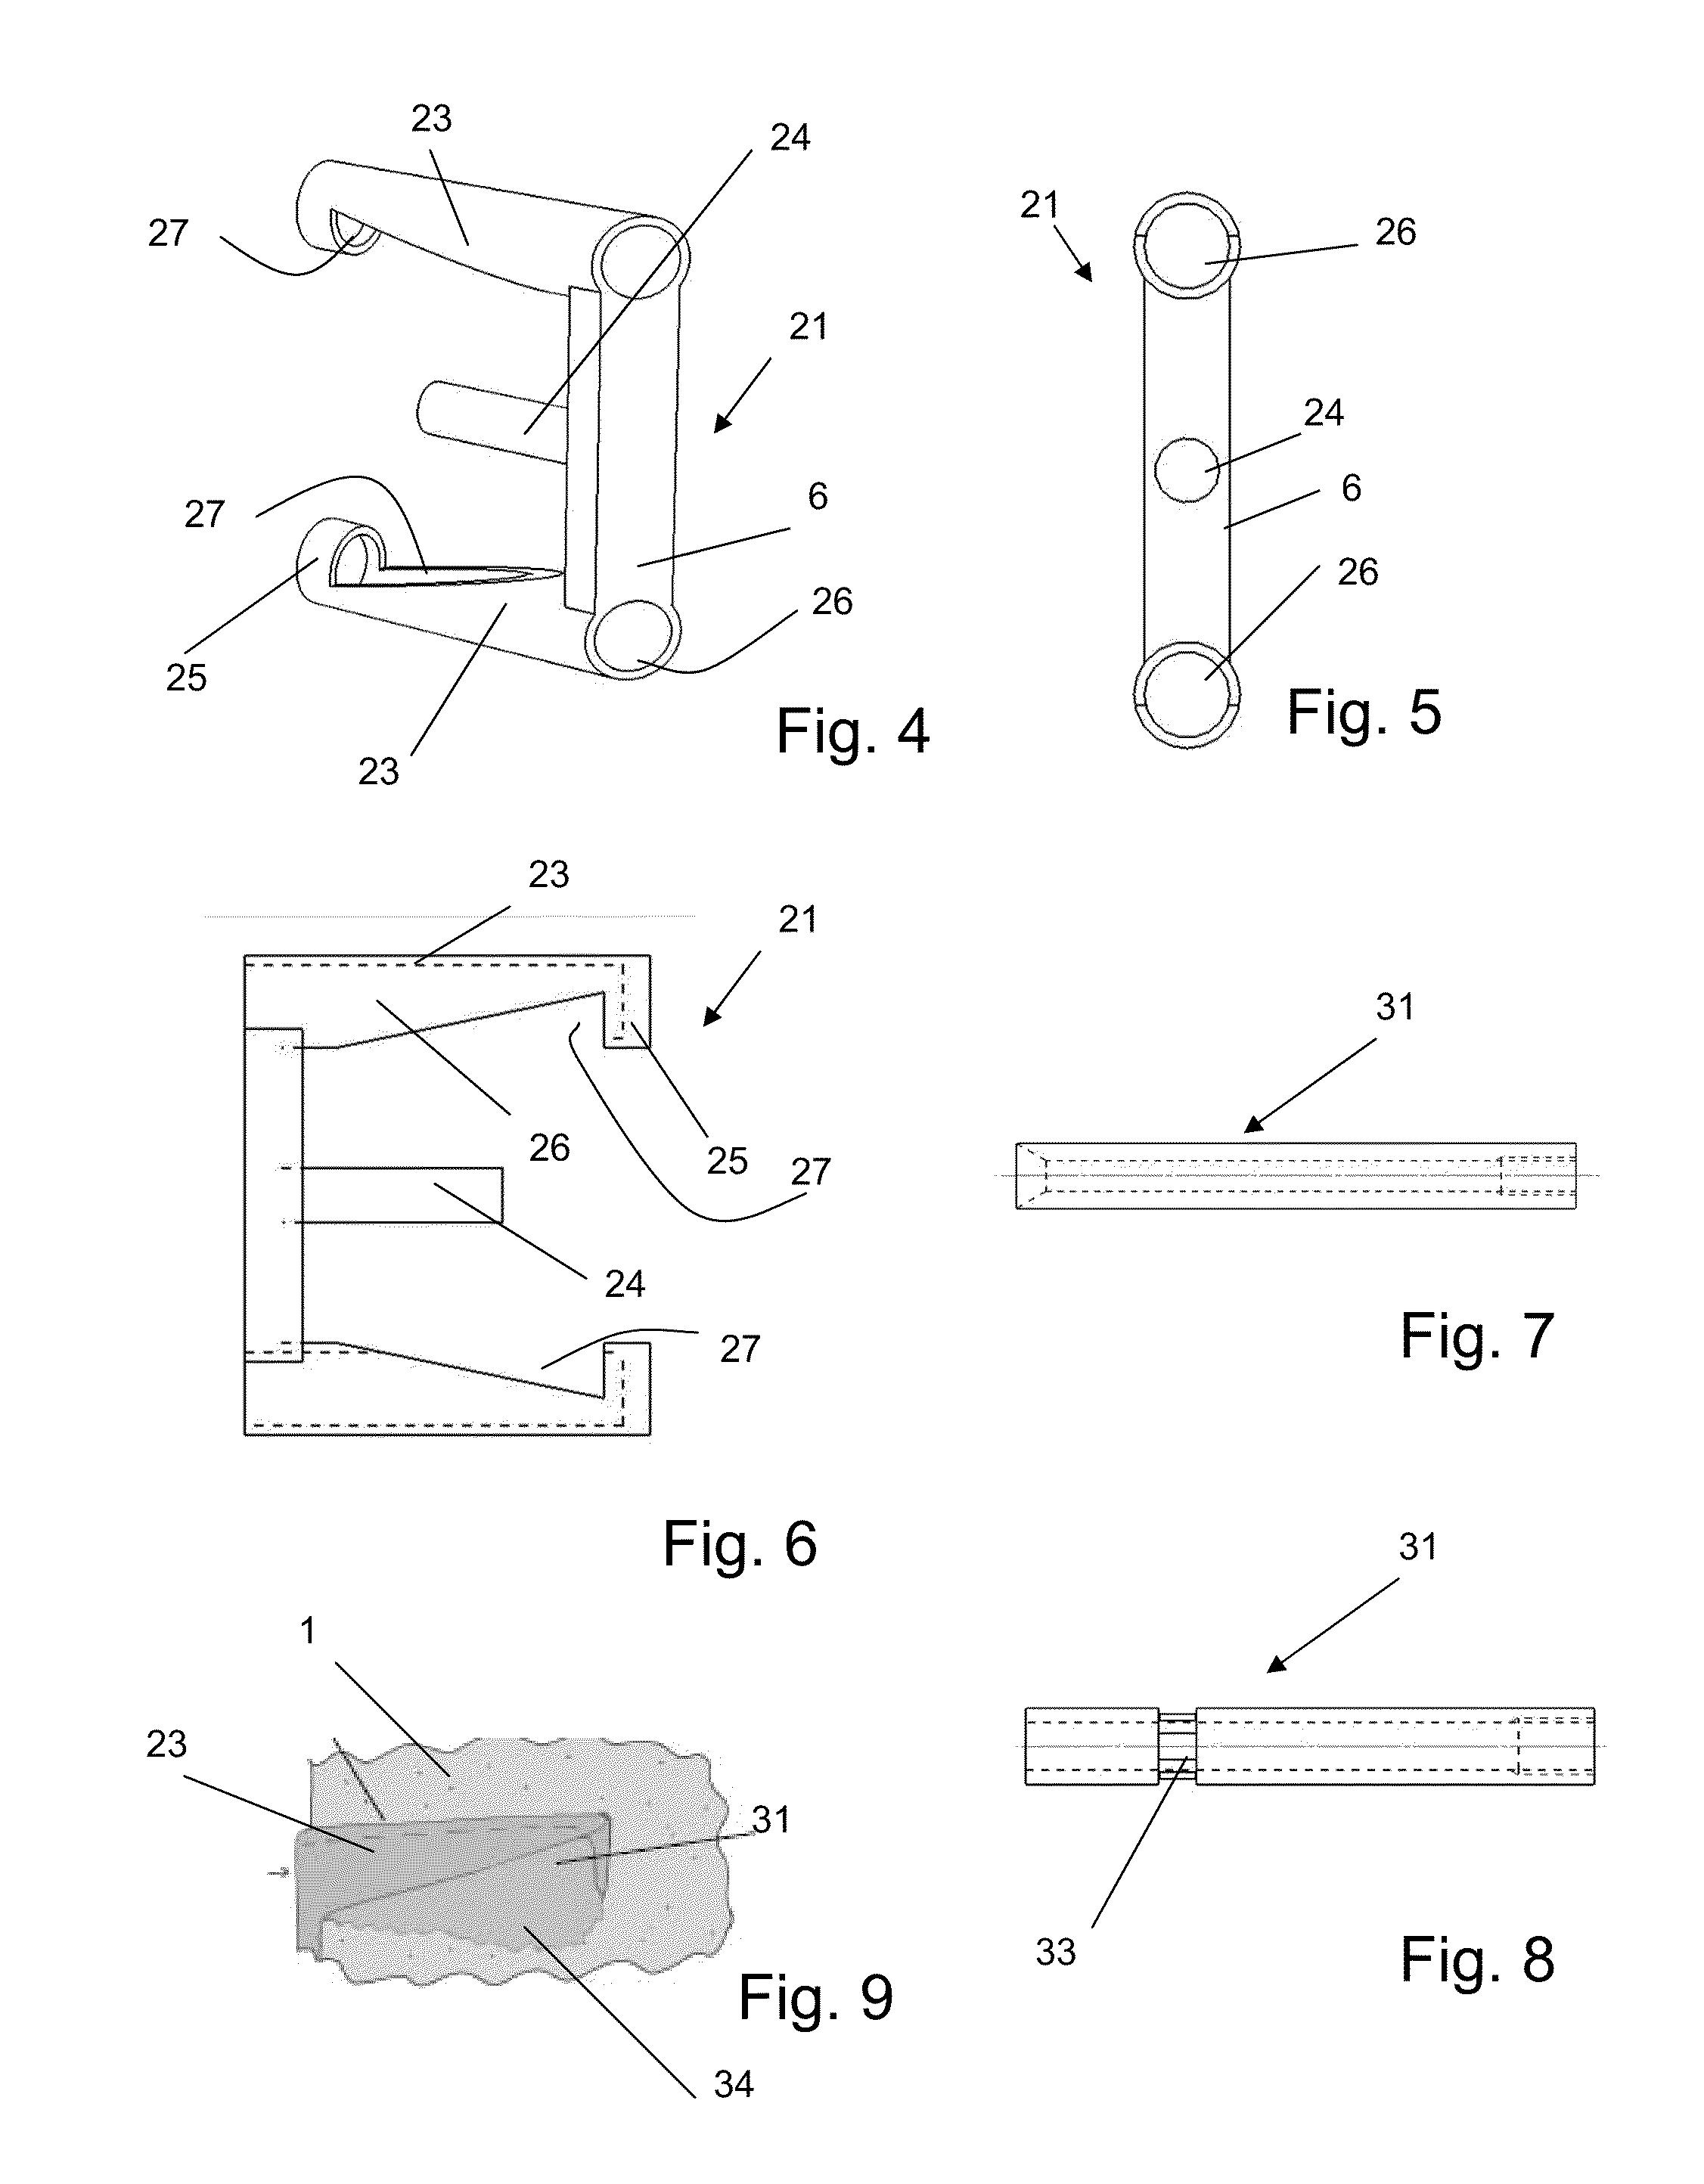 Spine stabilization device, and method and kit for its implantation